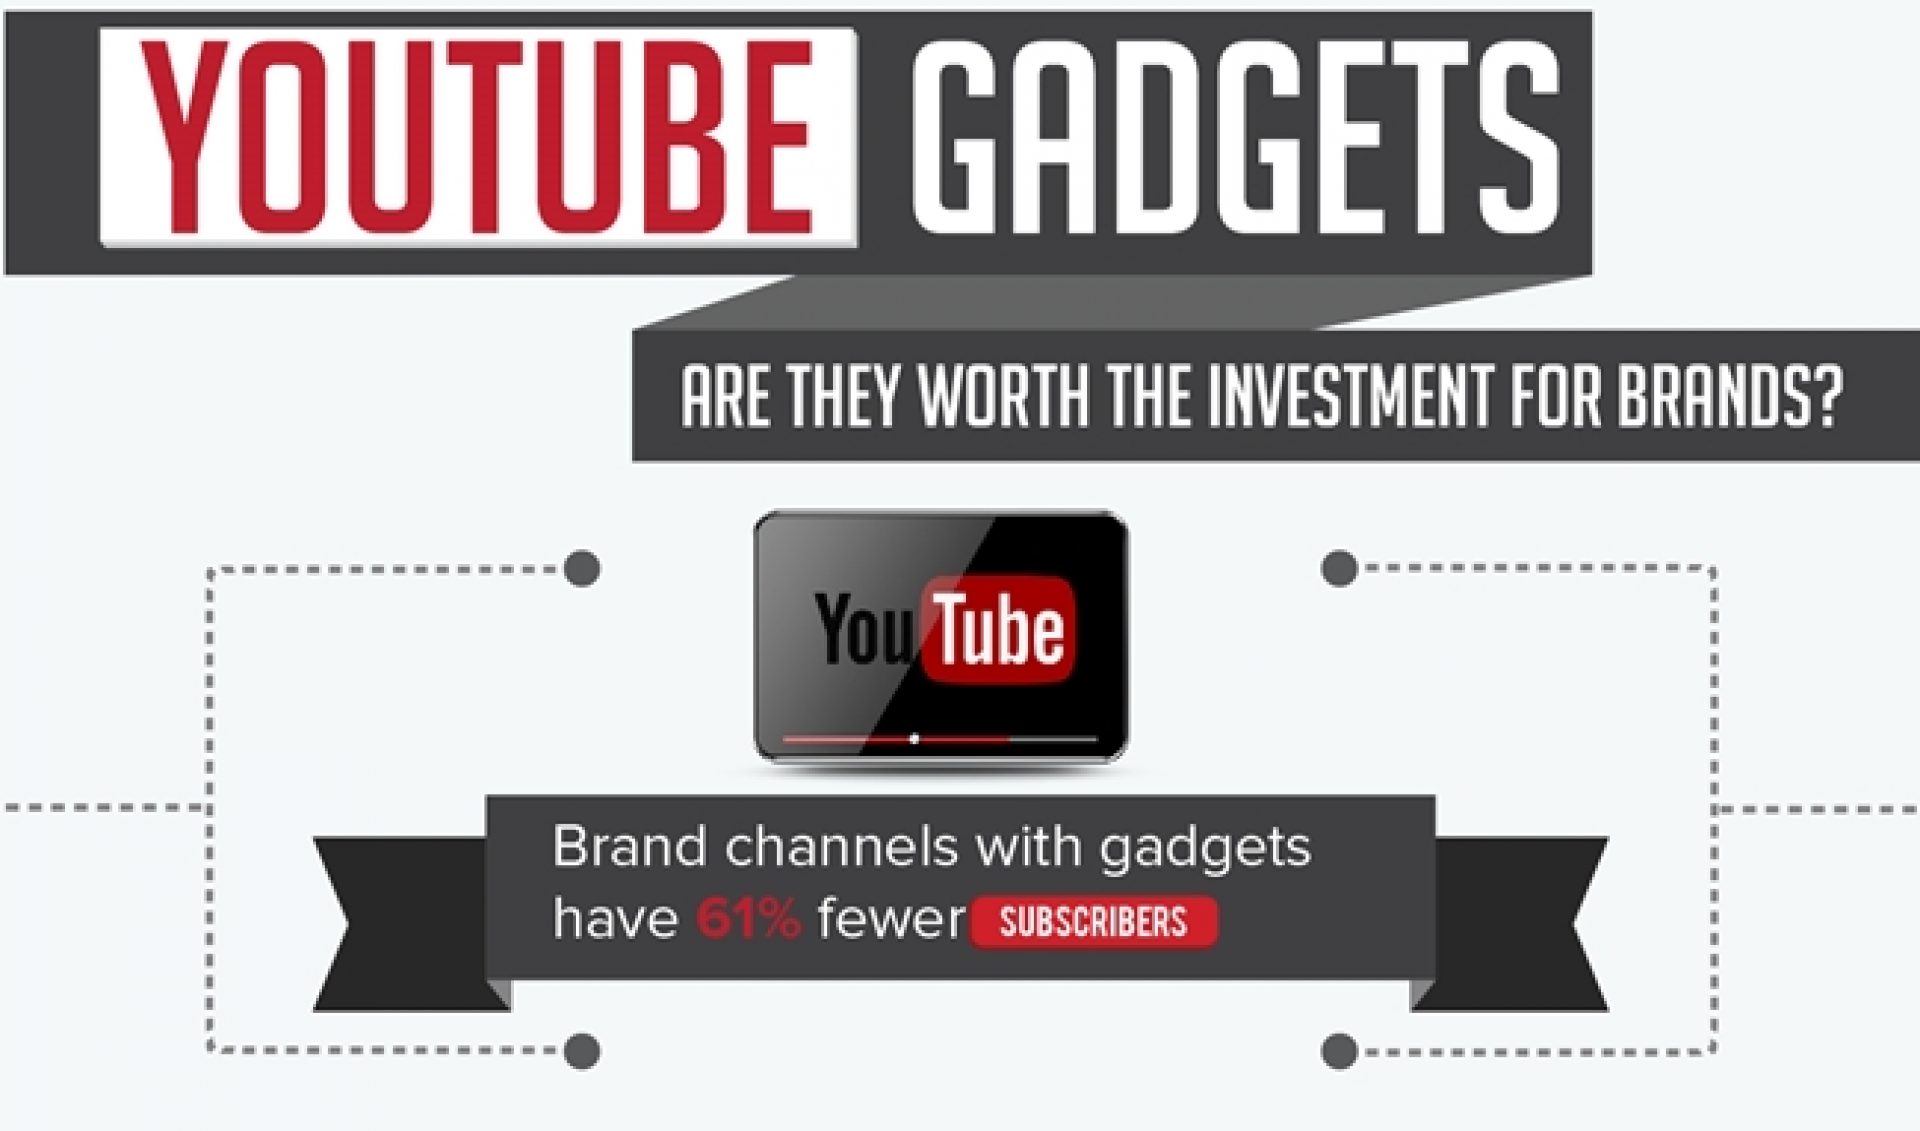 Study: “Gadgets” Not Worth The Price For Branded YouTube Channels [INFOGRAPHIC]